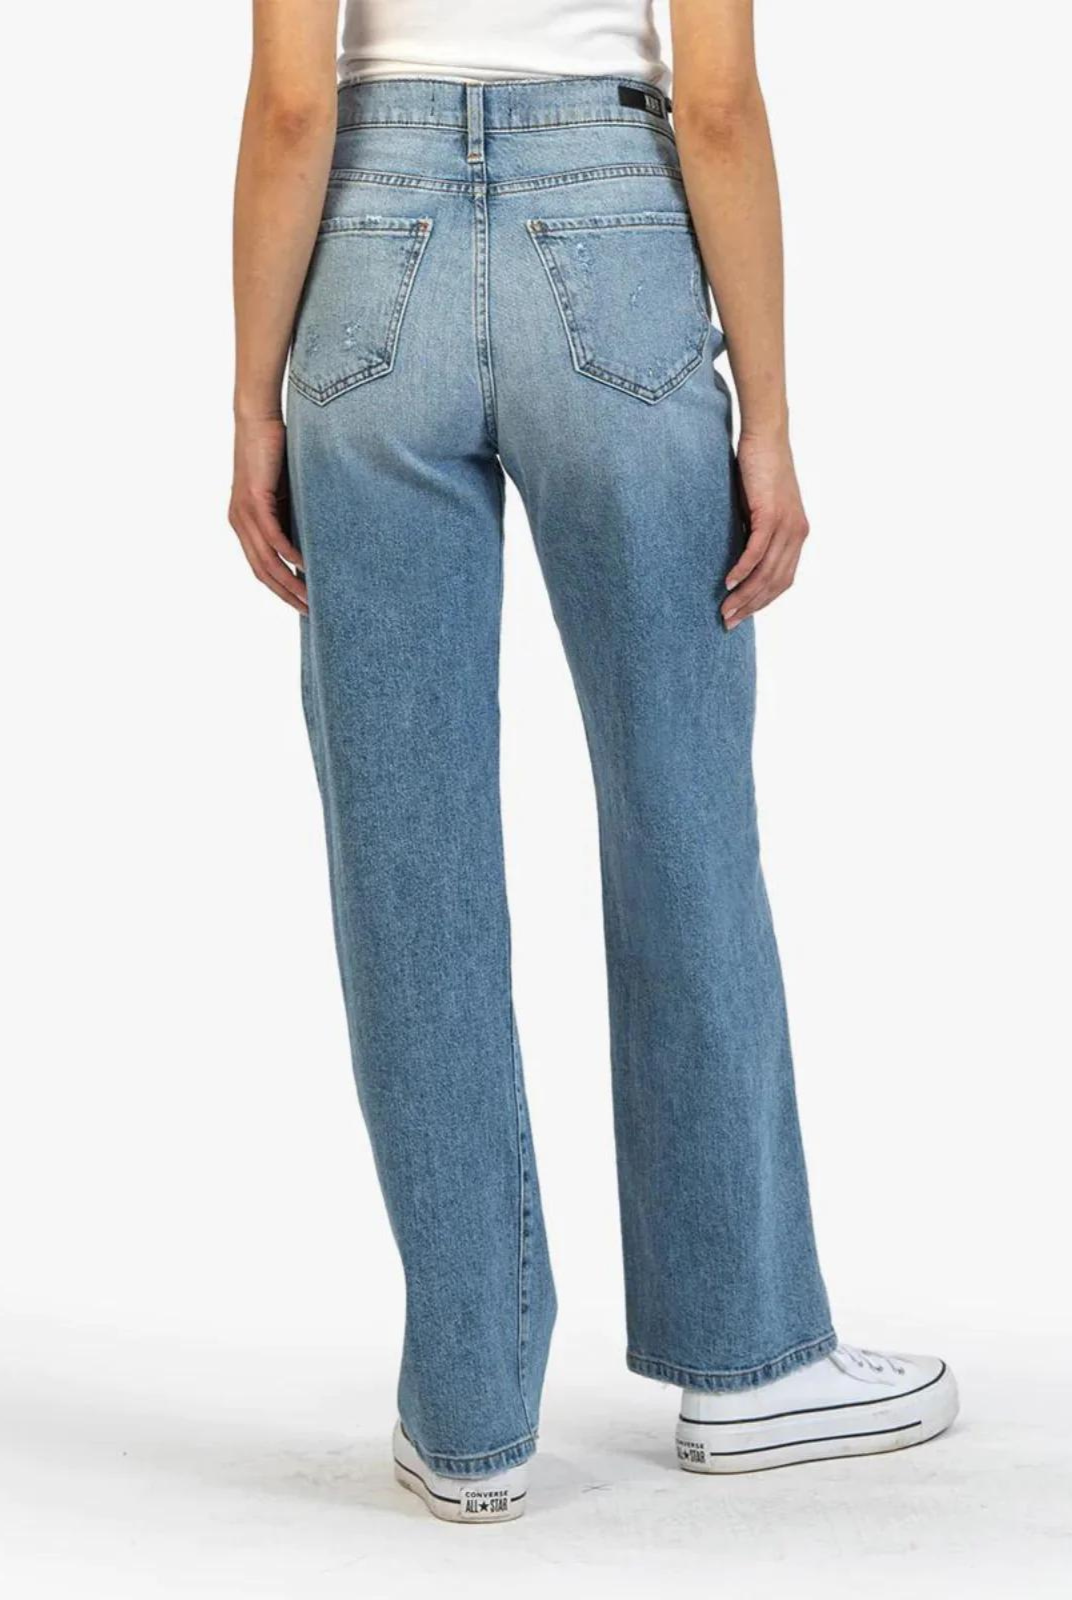 Kut From The Cloth Sienna High Rise Wide Leg - Coach. Sanded details render a timeworn appeal to rich indigo jeans cut in a wide-leg silhouette with frayed hems that further their well-loved look.